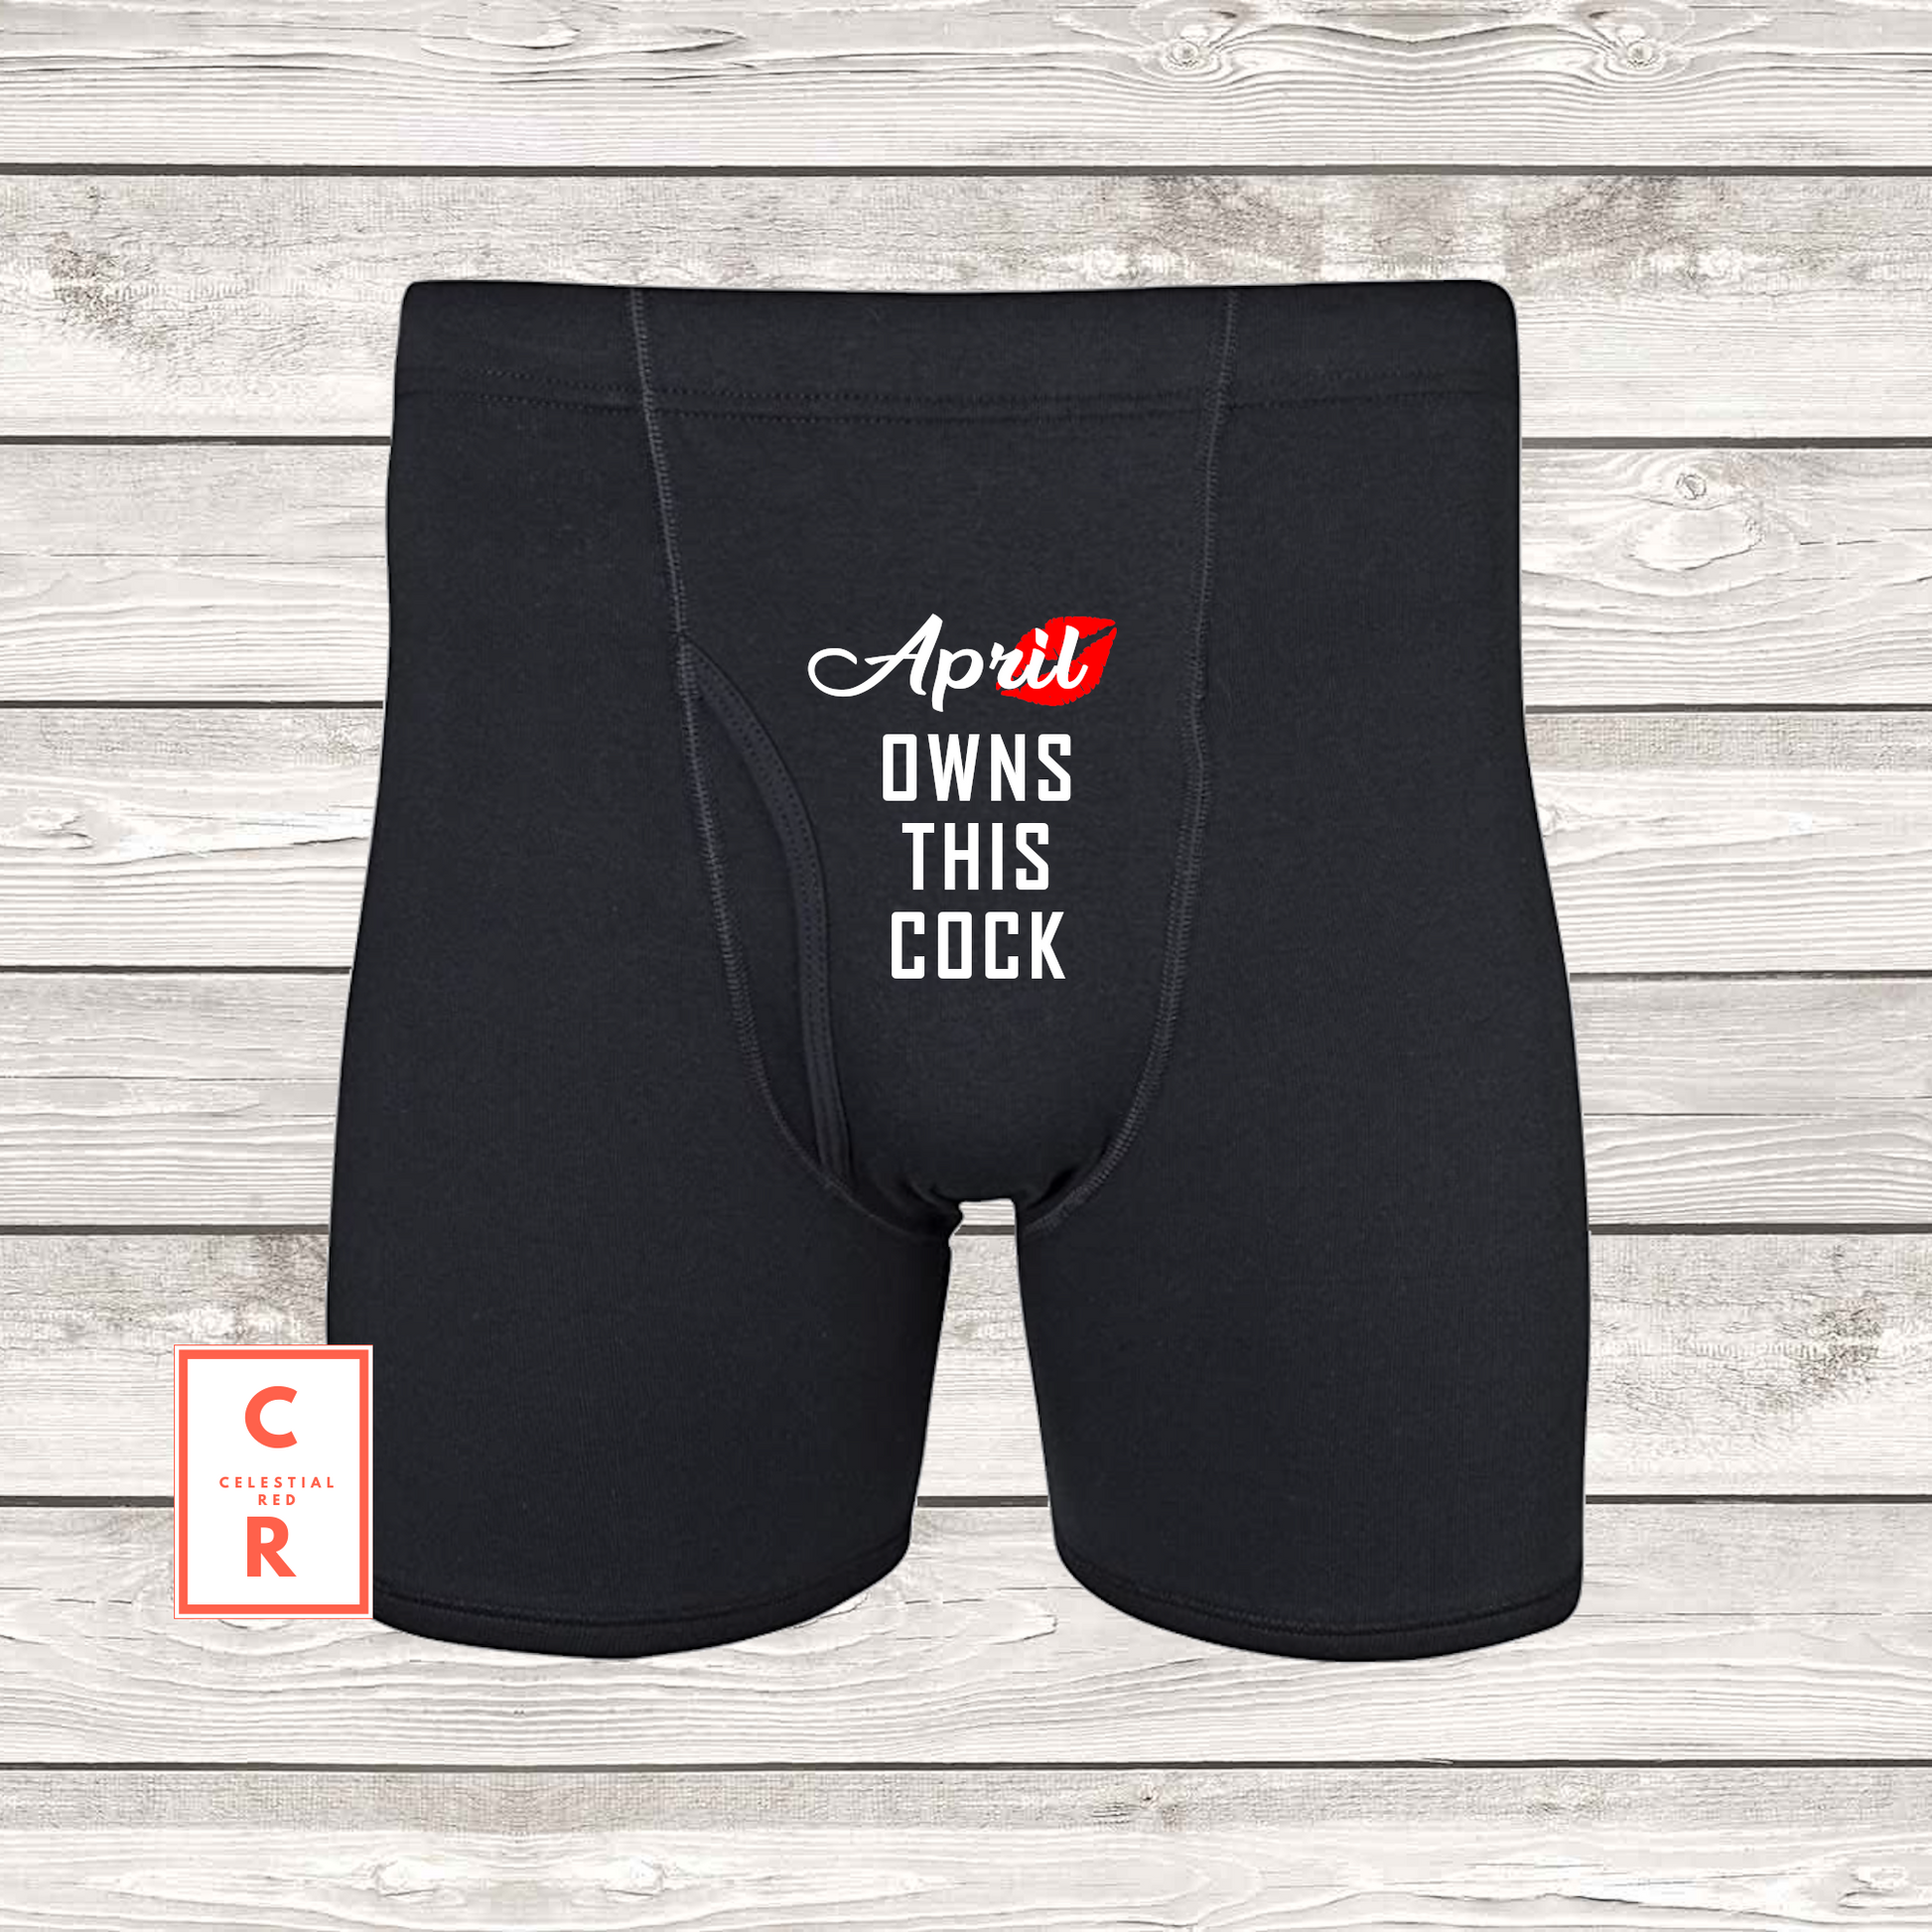 Femdom Name Owns This Cock Boxer Briefs